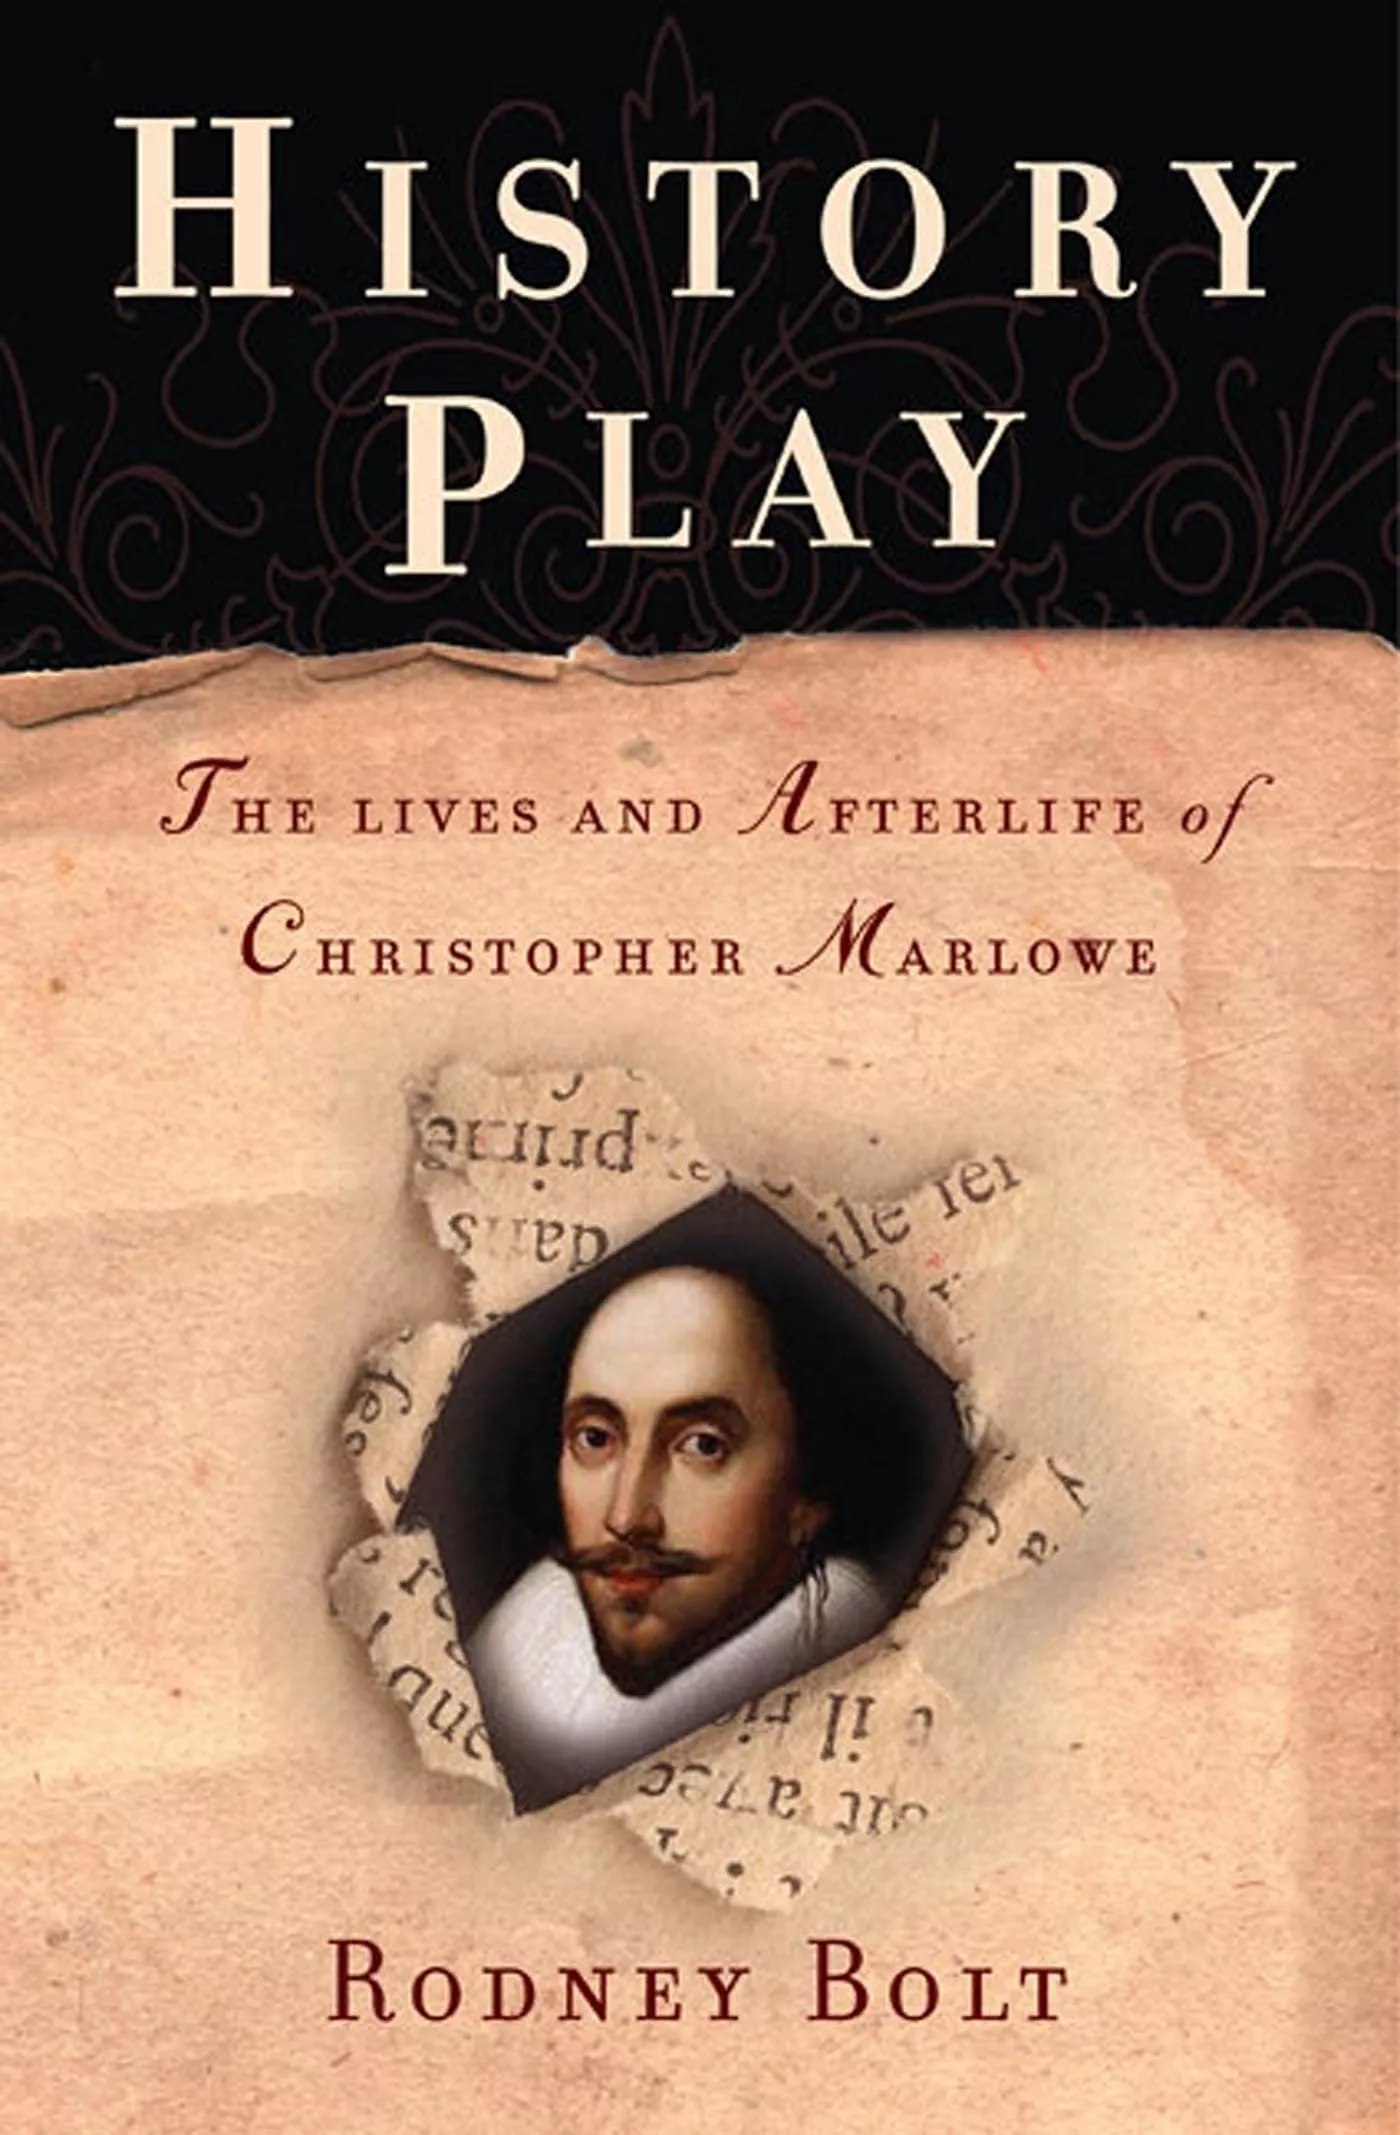 Rodney Bolt, History Play – The Lives and Afterlife of Christopher Marlowe